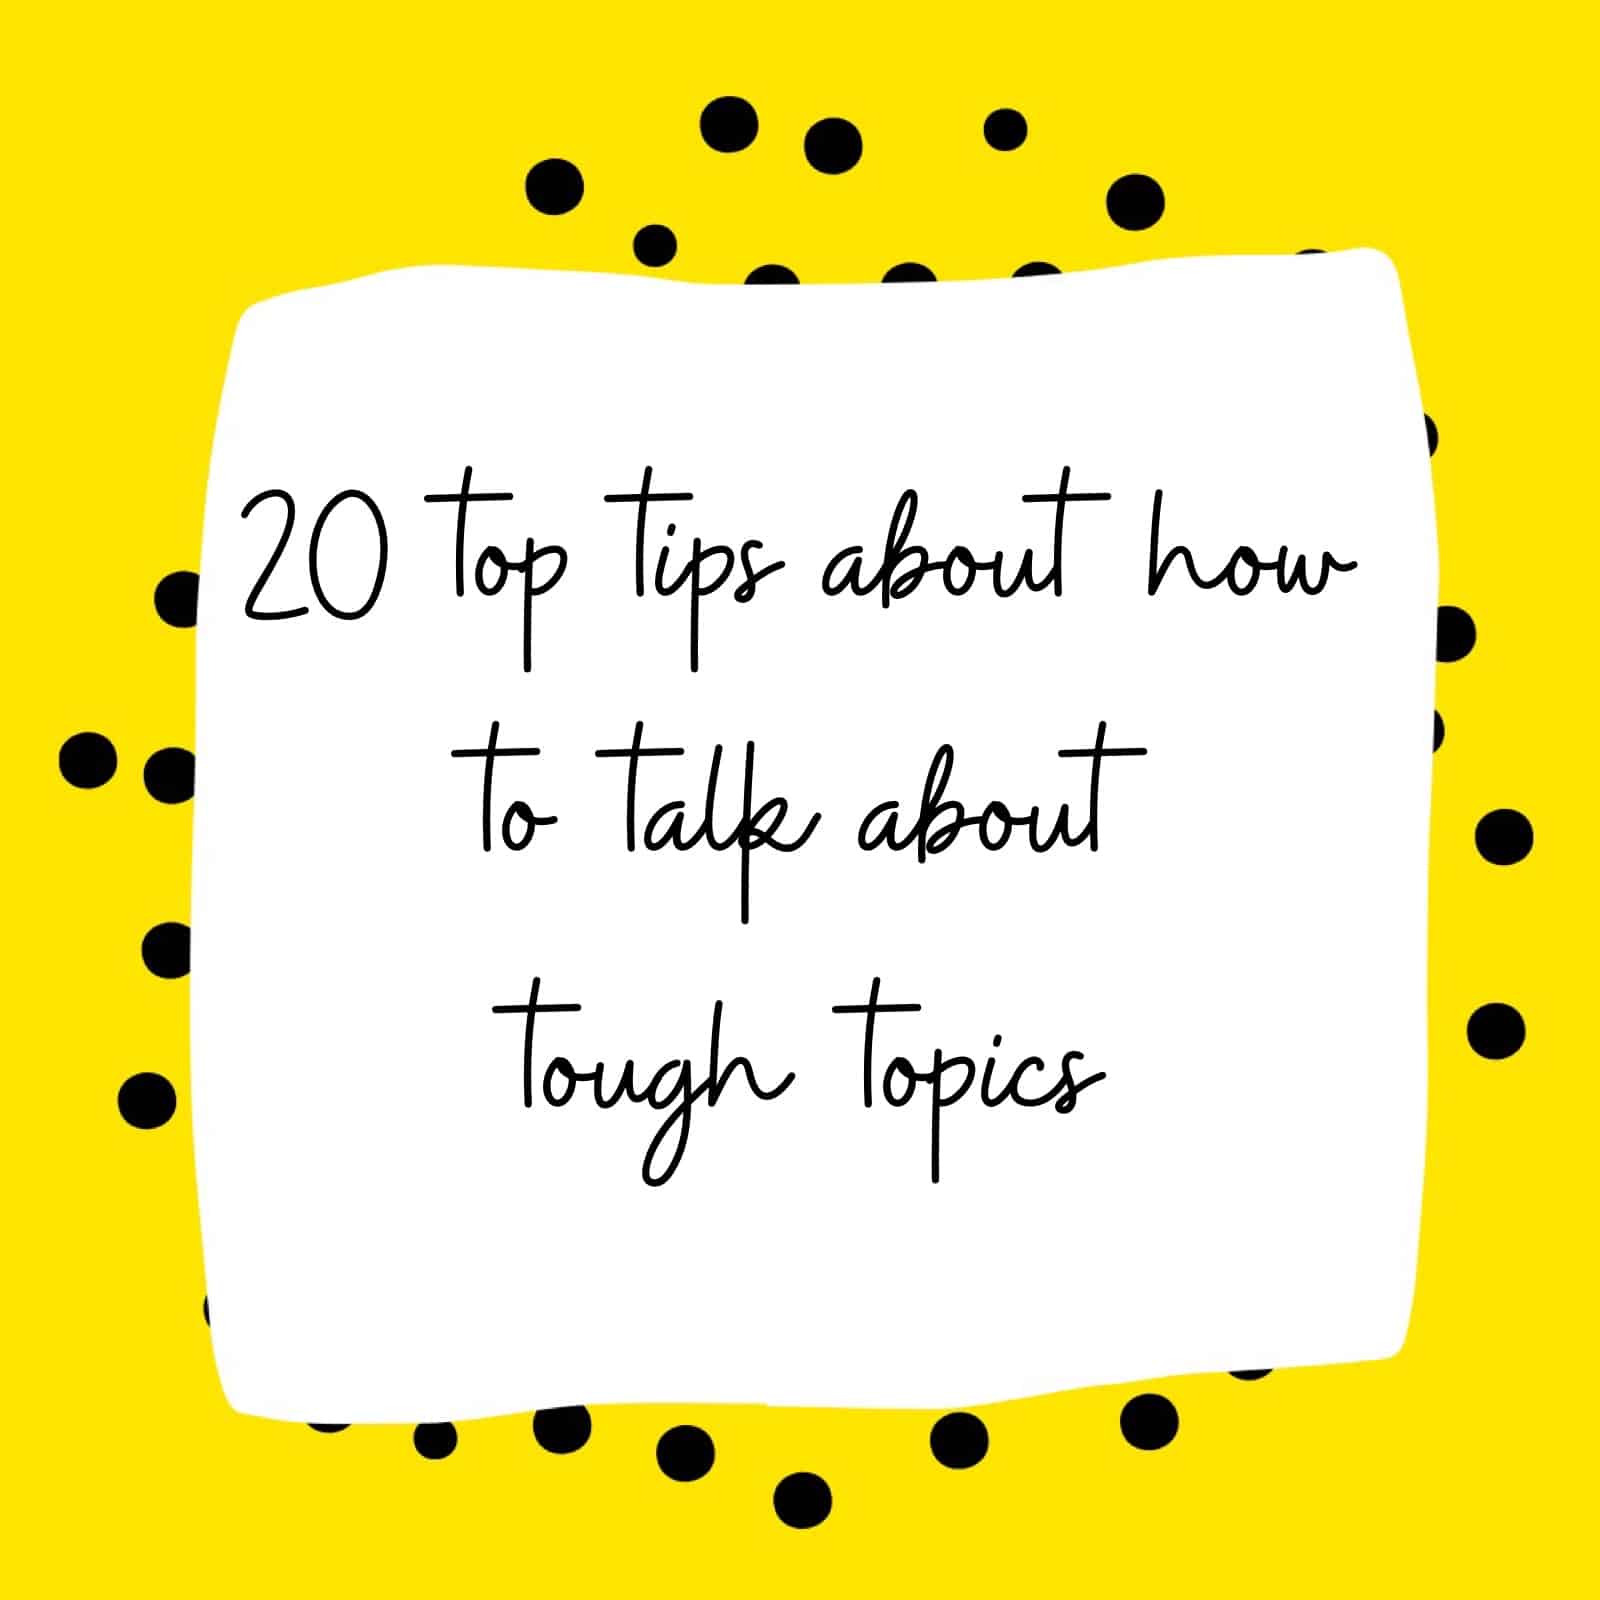 20 top tips about how to talk about tough topics